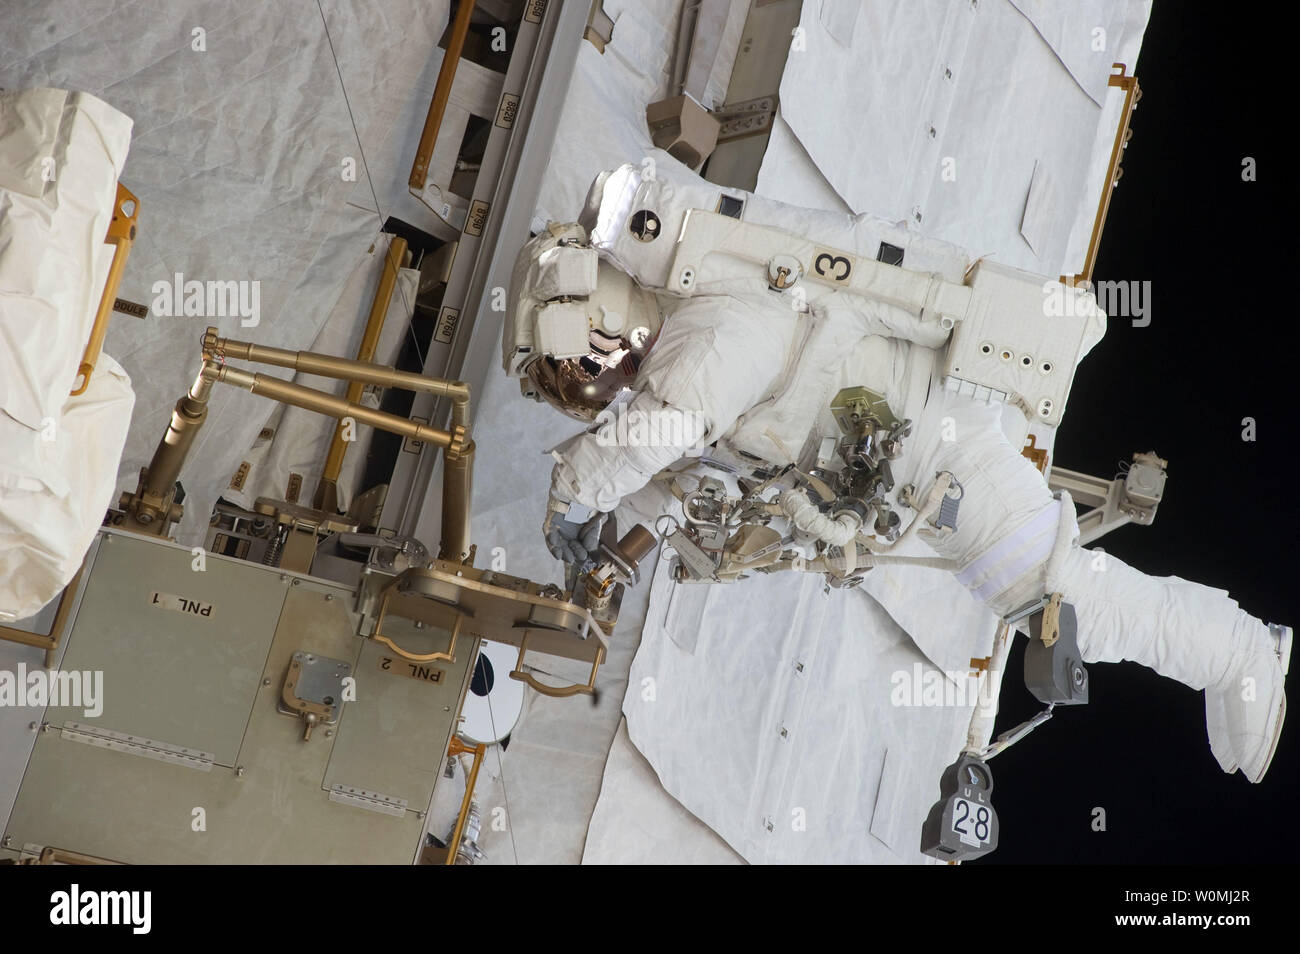 NASA astronaut Michael Fincke participates in the mission's fourth session of extravehicular activity (EVA) as construction and maintenance continue on the International Space Station on May 27, 2011. This is expected to be the very last spacewalk to be performed by shuttle crew astronauts.    UPI/NASA Stock Photo